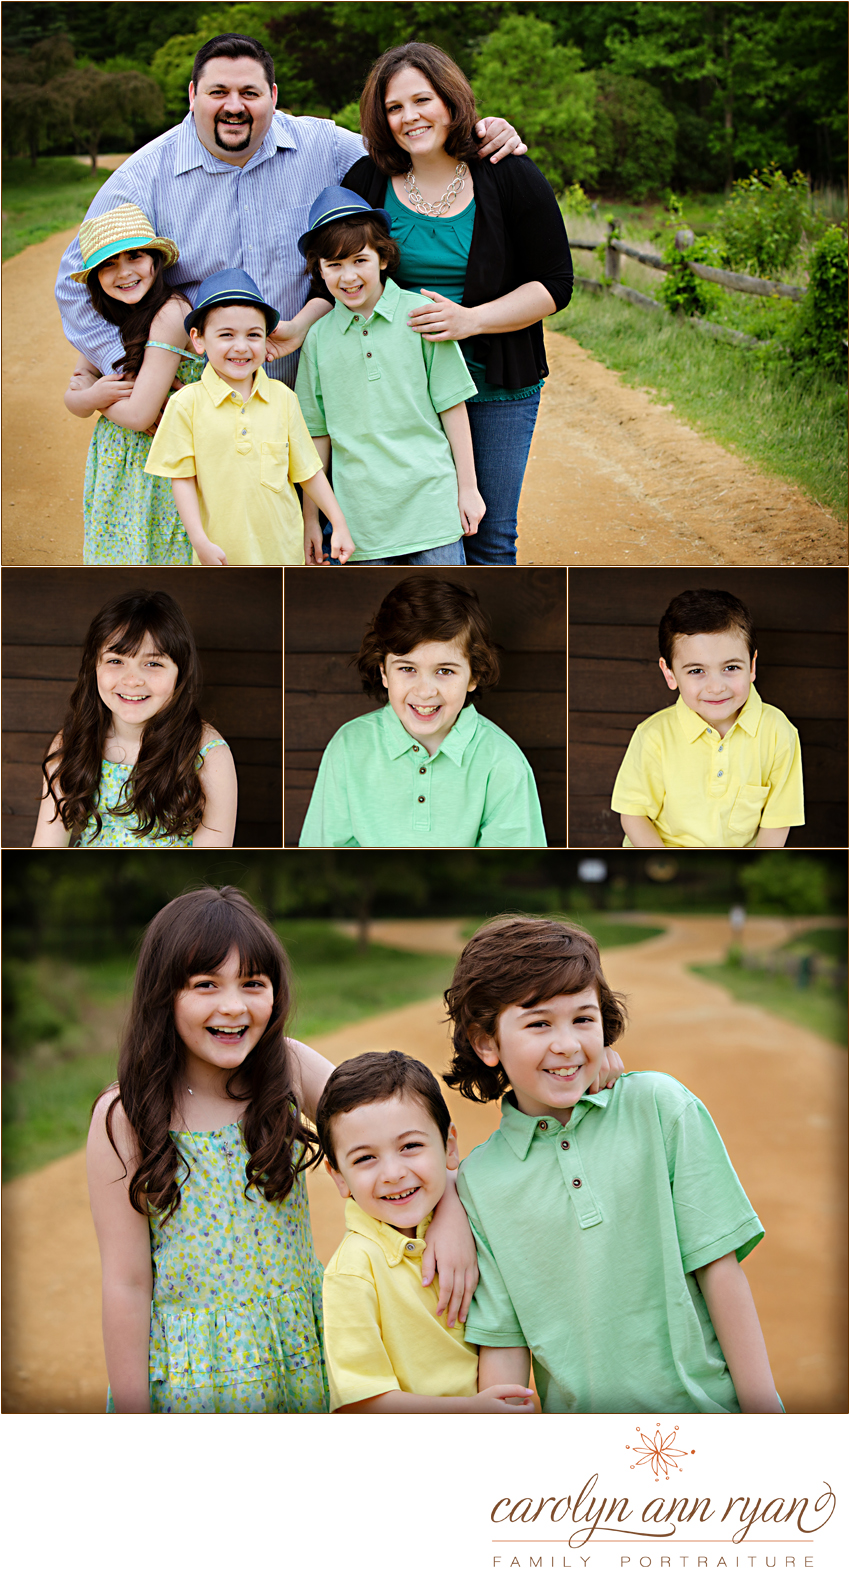 Child and Family Photographer, Carolyn Ann Ryan, photographs clients at Holmdel Park in NJ